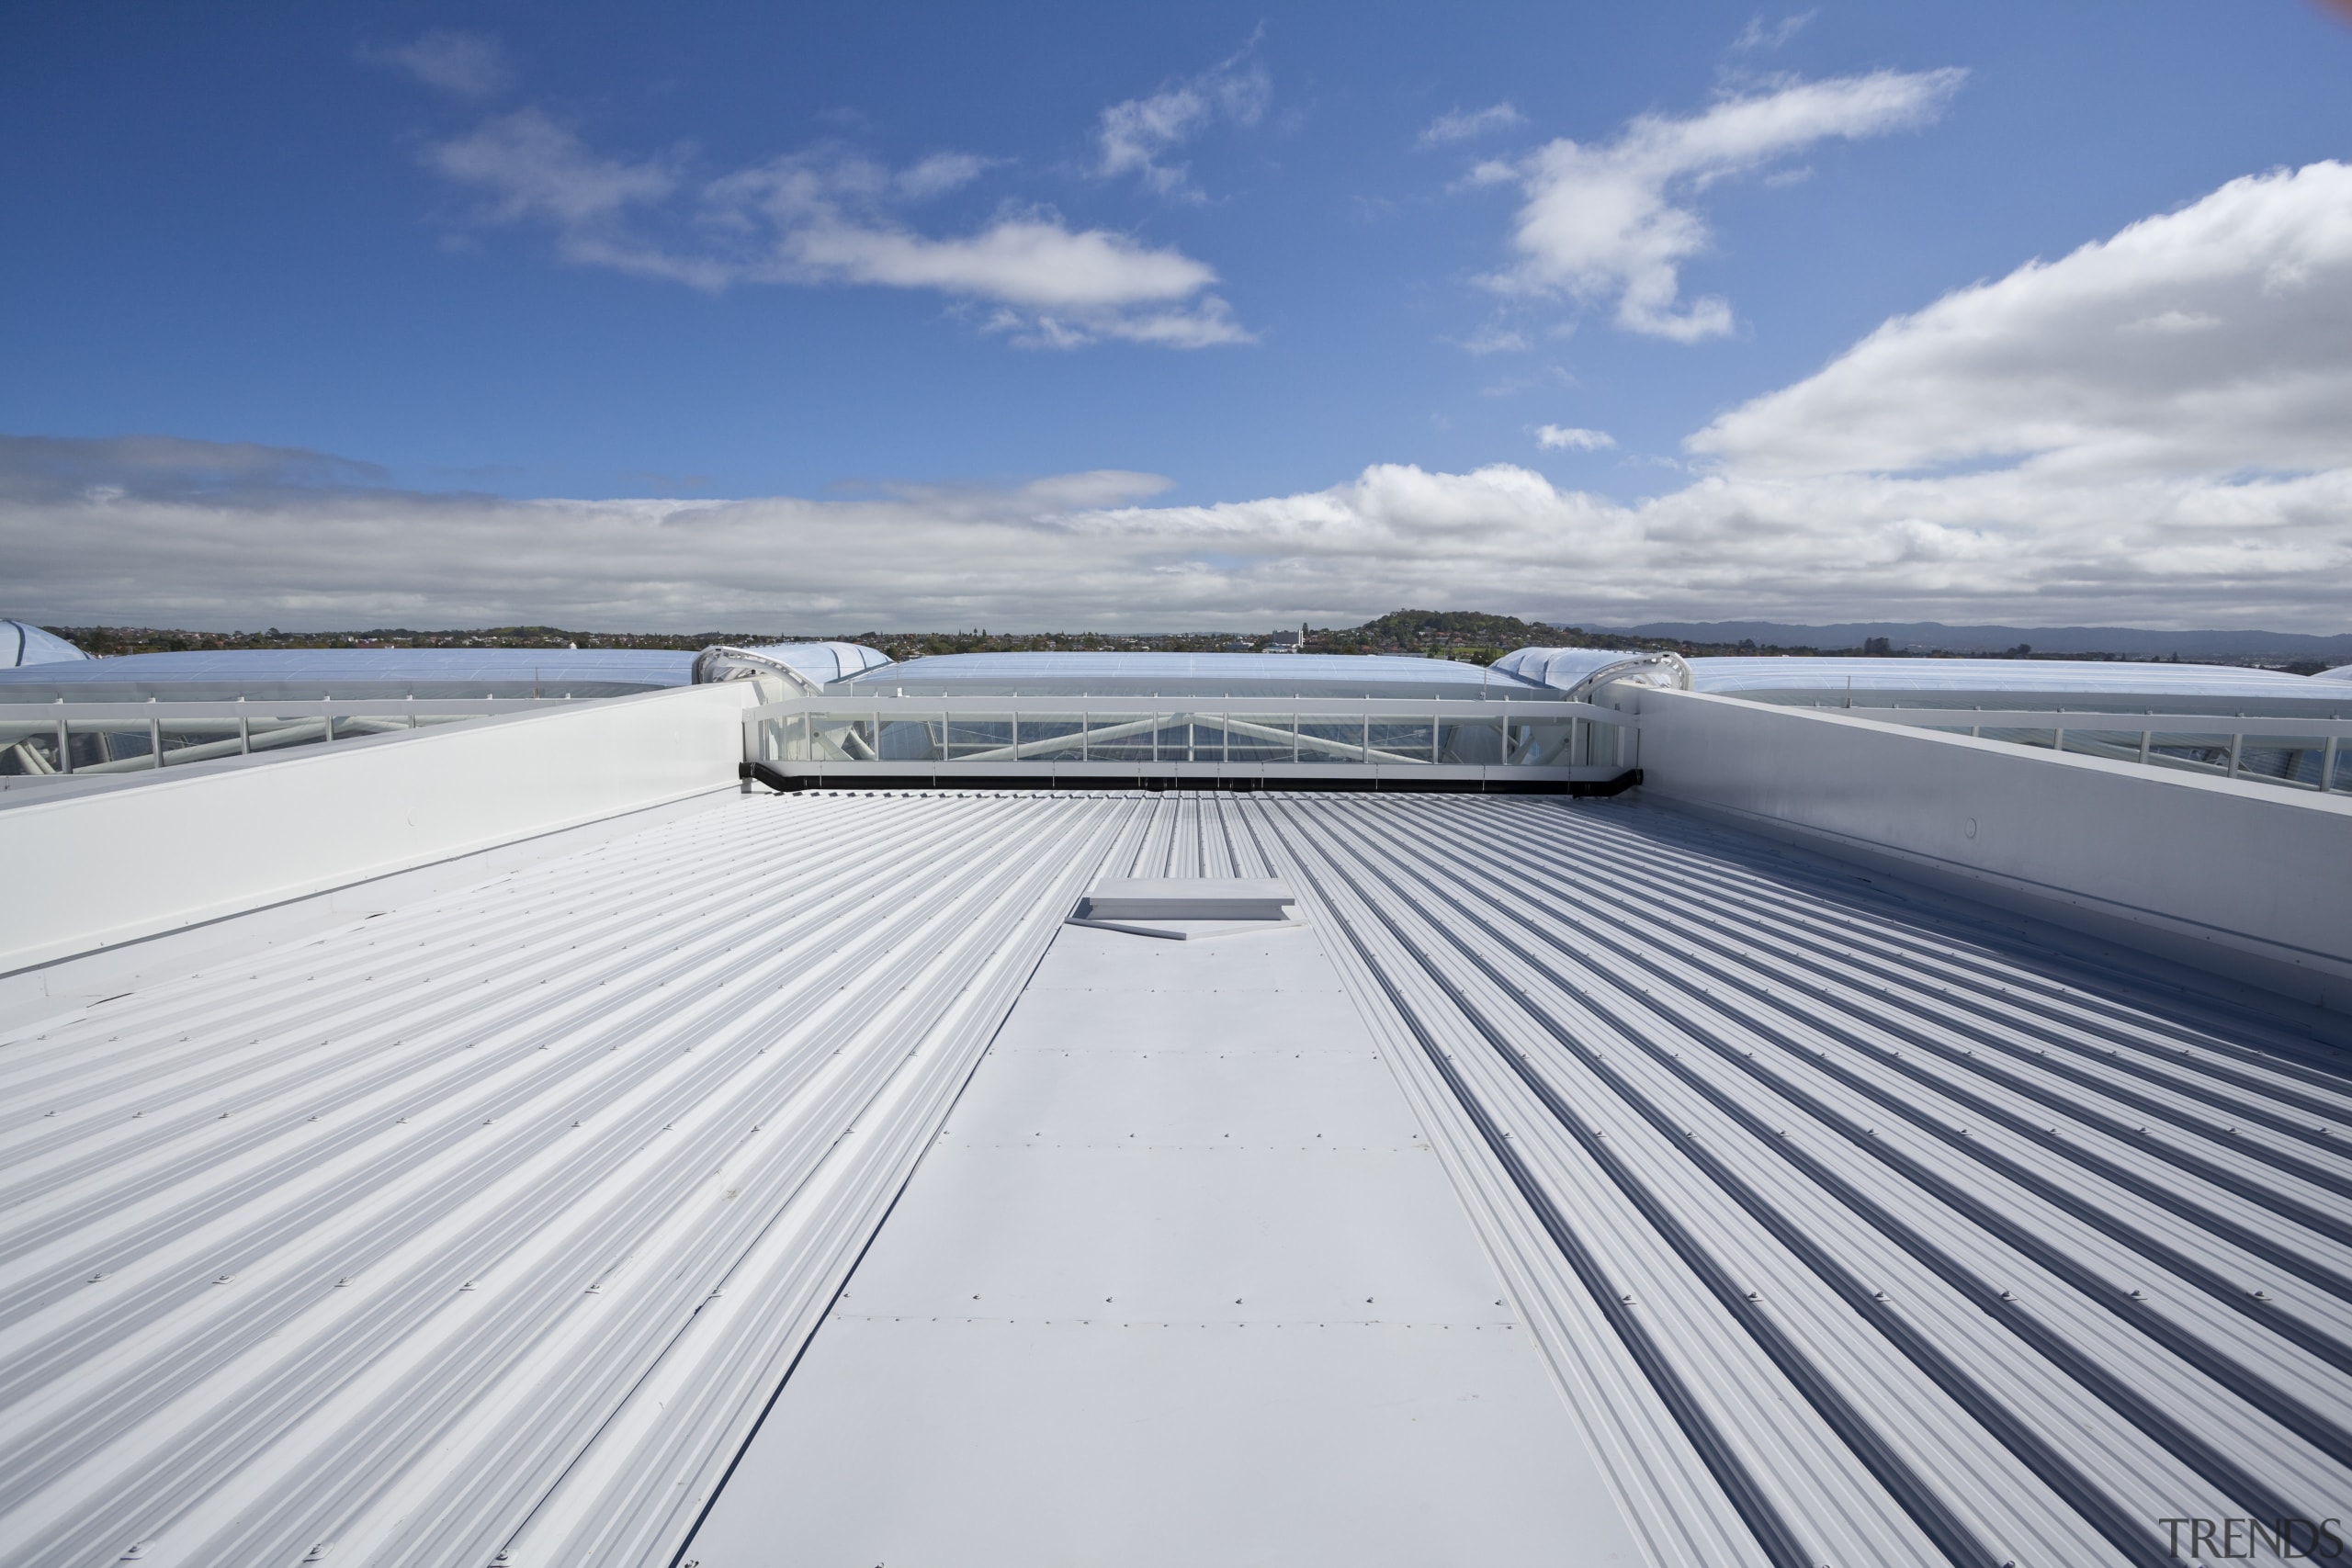 View of the cantilevered roof of the South boat, cloud, daylighting, daytime, deck, fixed link, line, roof, sea, sky, water, yacht, gray